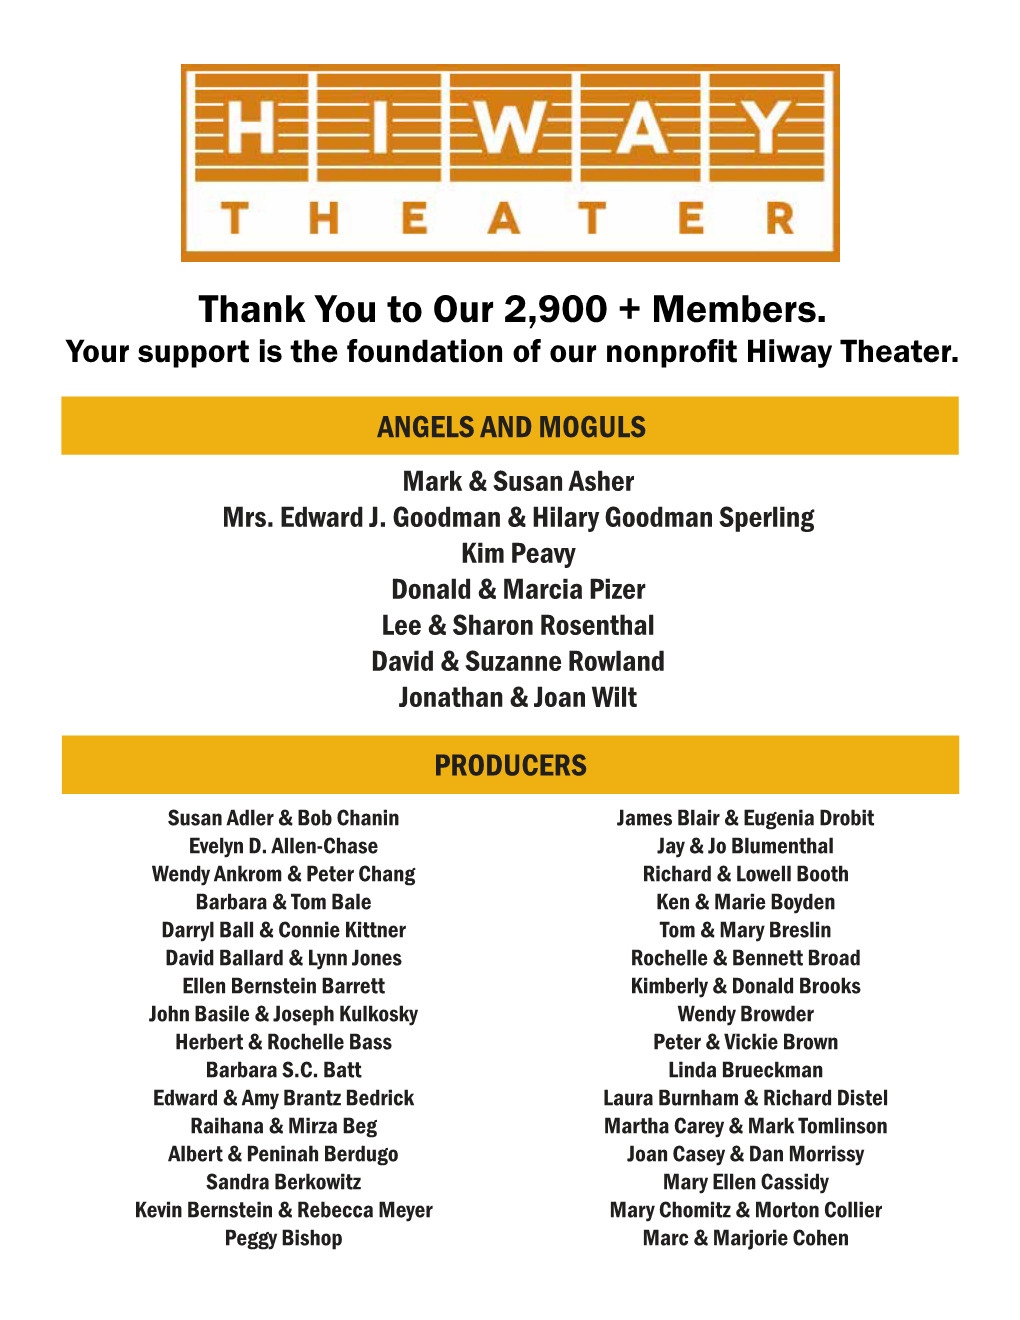 Thank You to Our 2,900 + Members. Your Support Is the Foundation of Our Nonprofit Hiway Theater